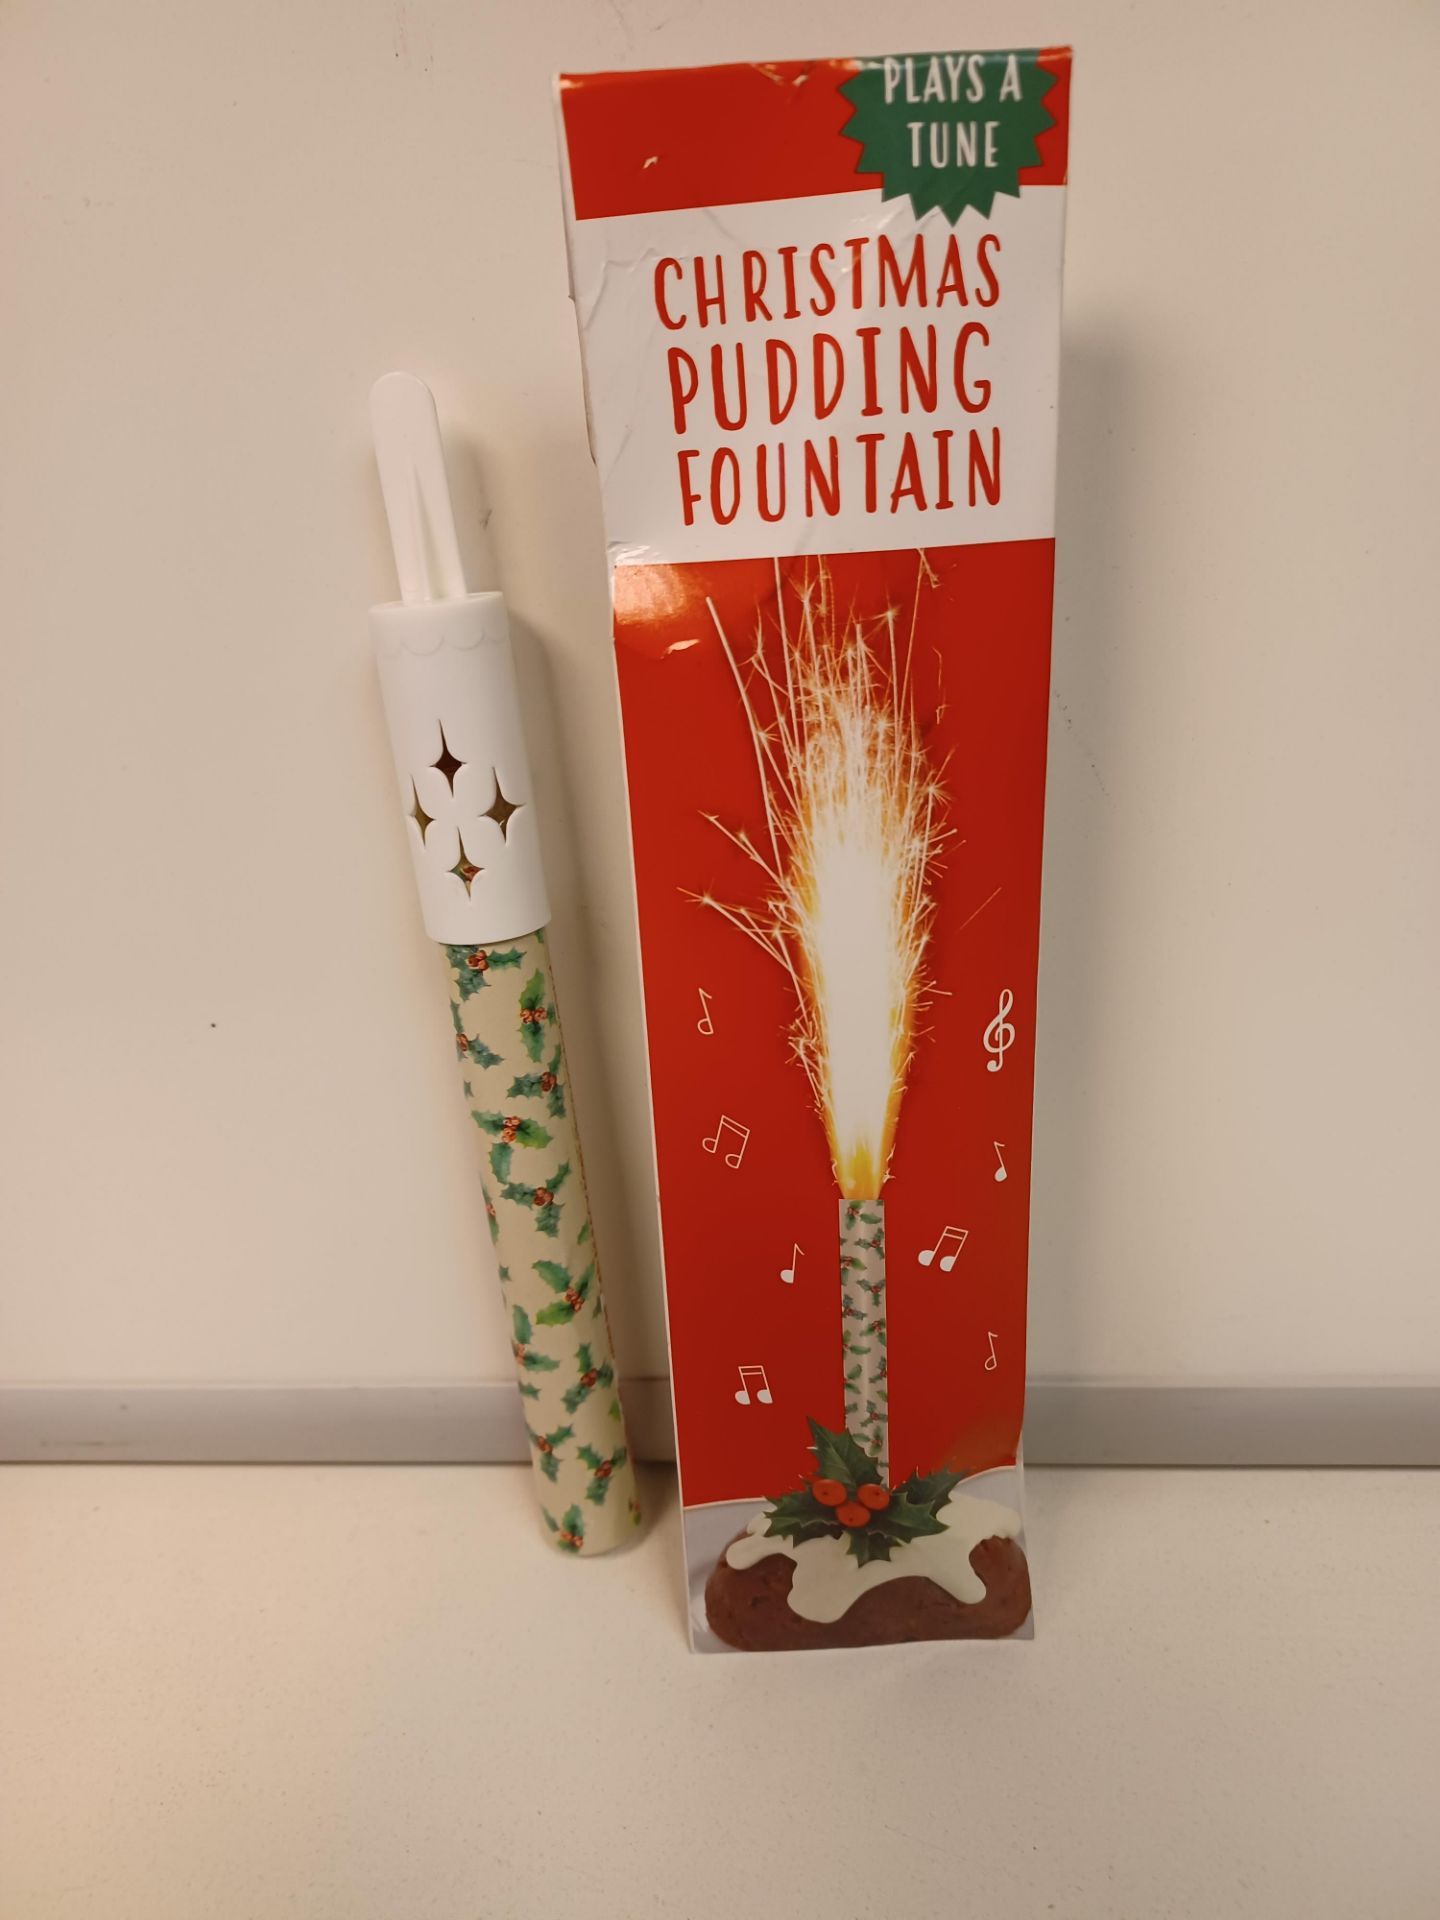 20 X NEW PACKAGED CHRISTMAS PUDDING FOUNTAINS - PLAYS A TUNE. RRP £6.99 EACH (ROW13 TOP)